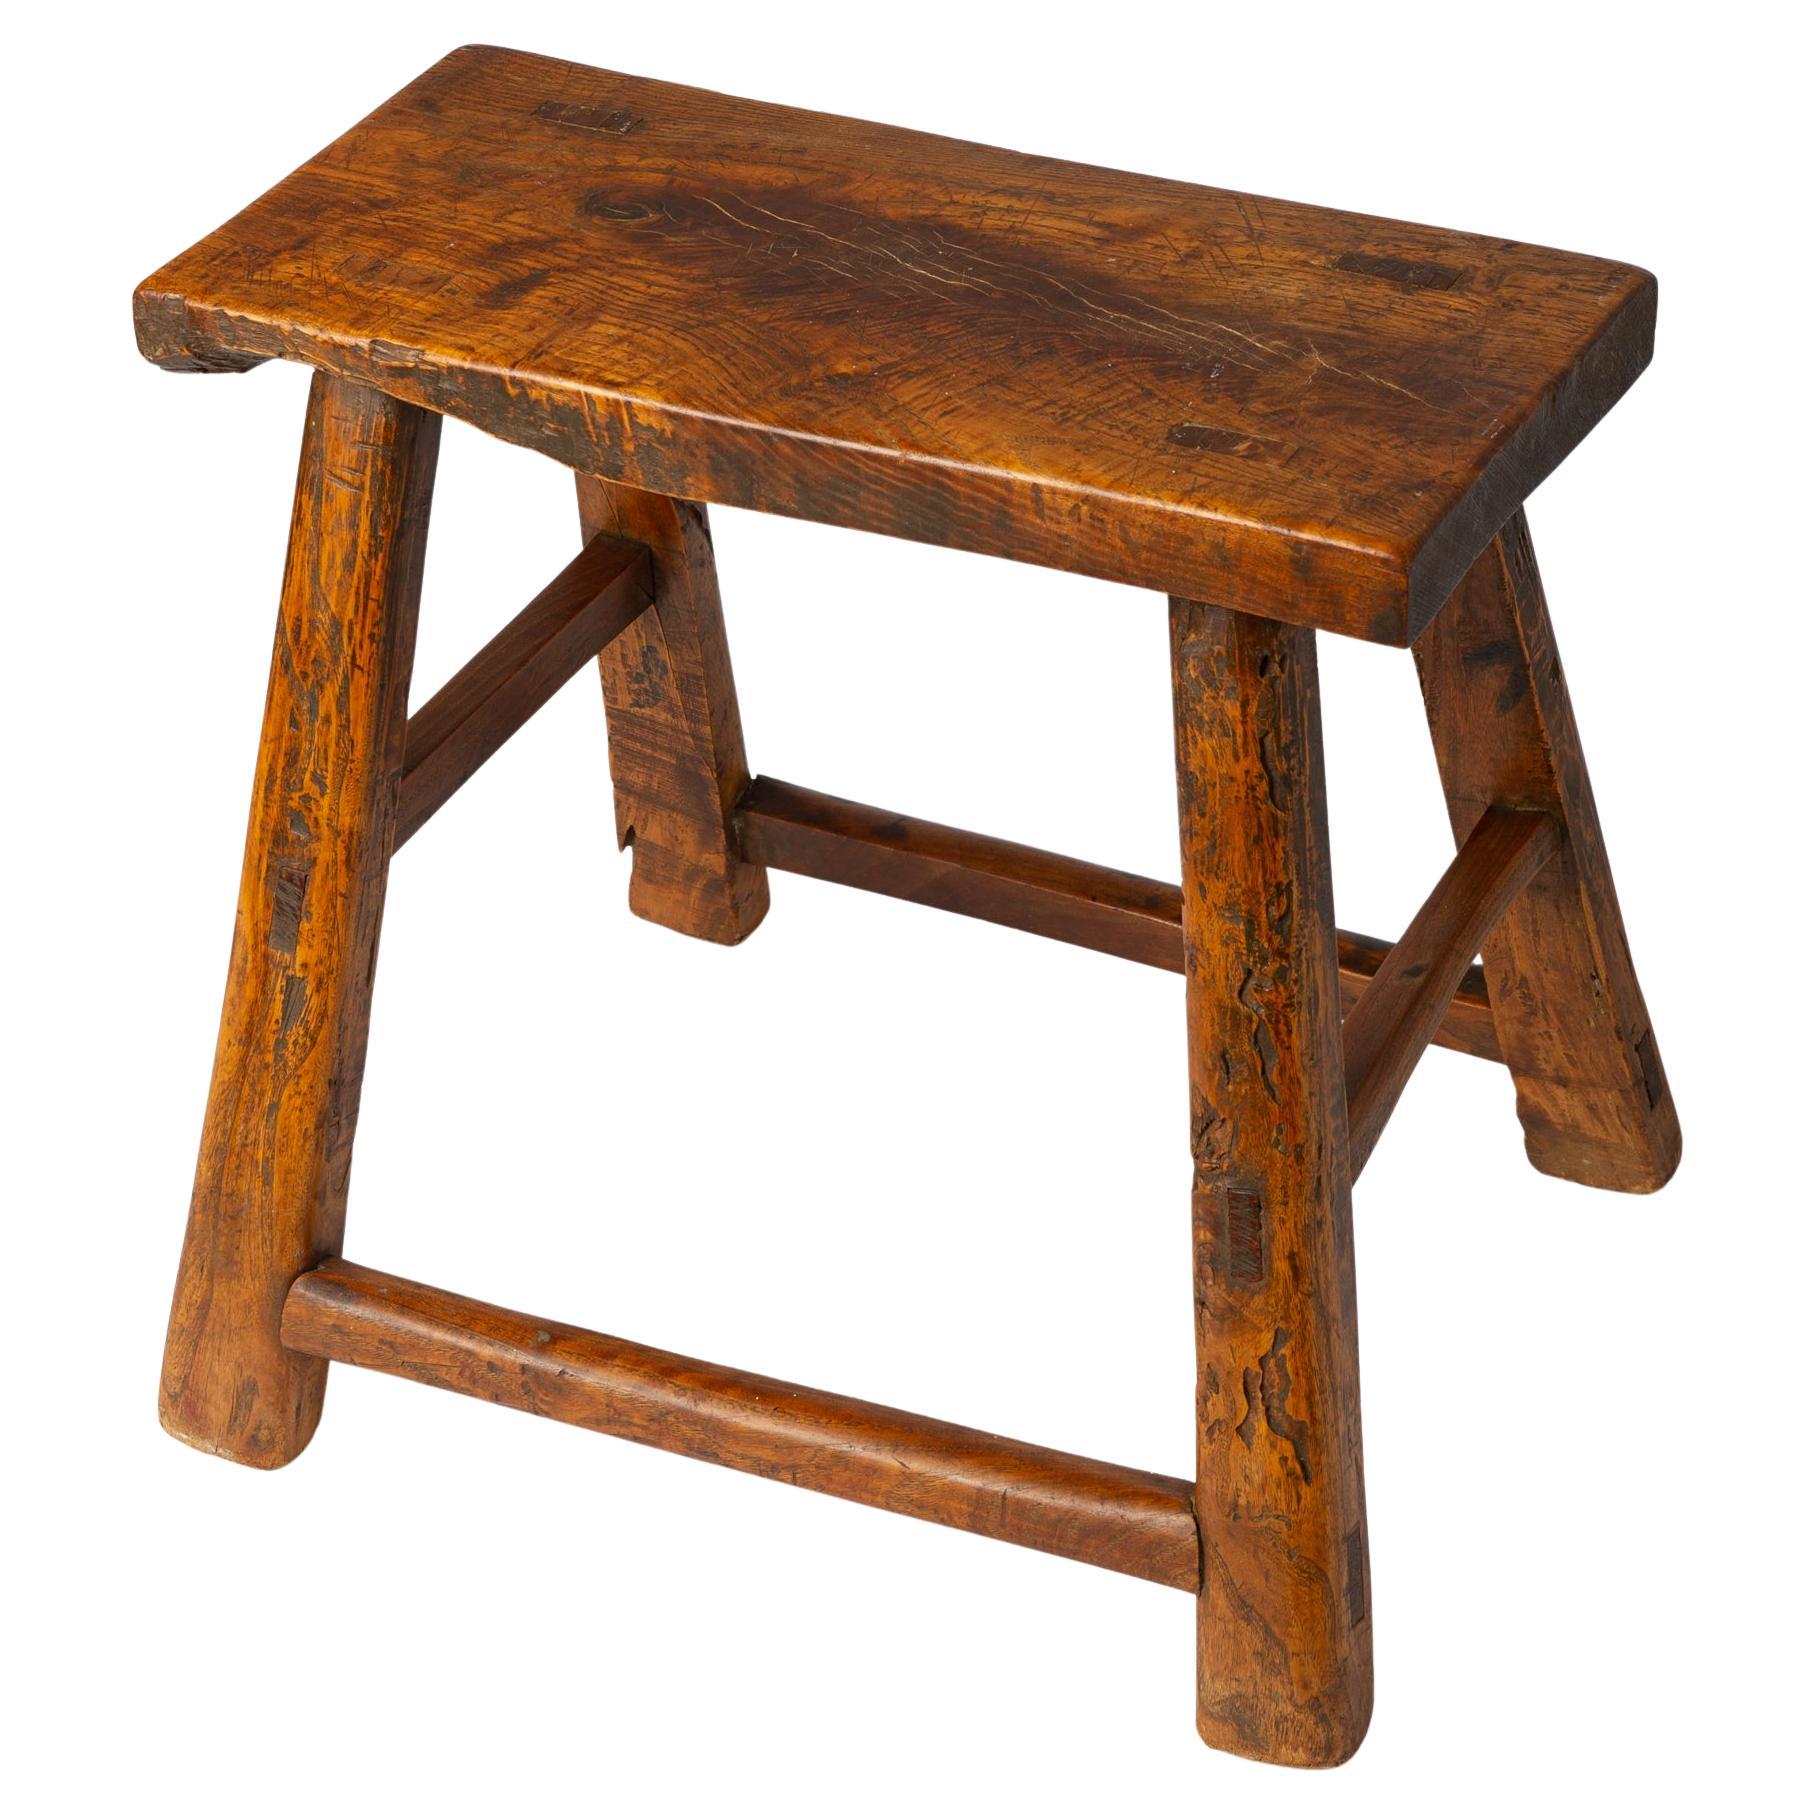 Wooden Rustic Stool For Sale